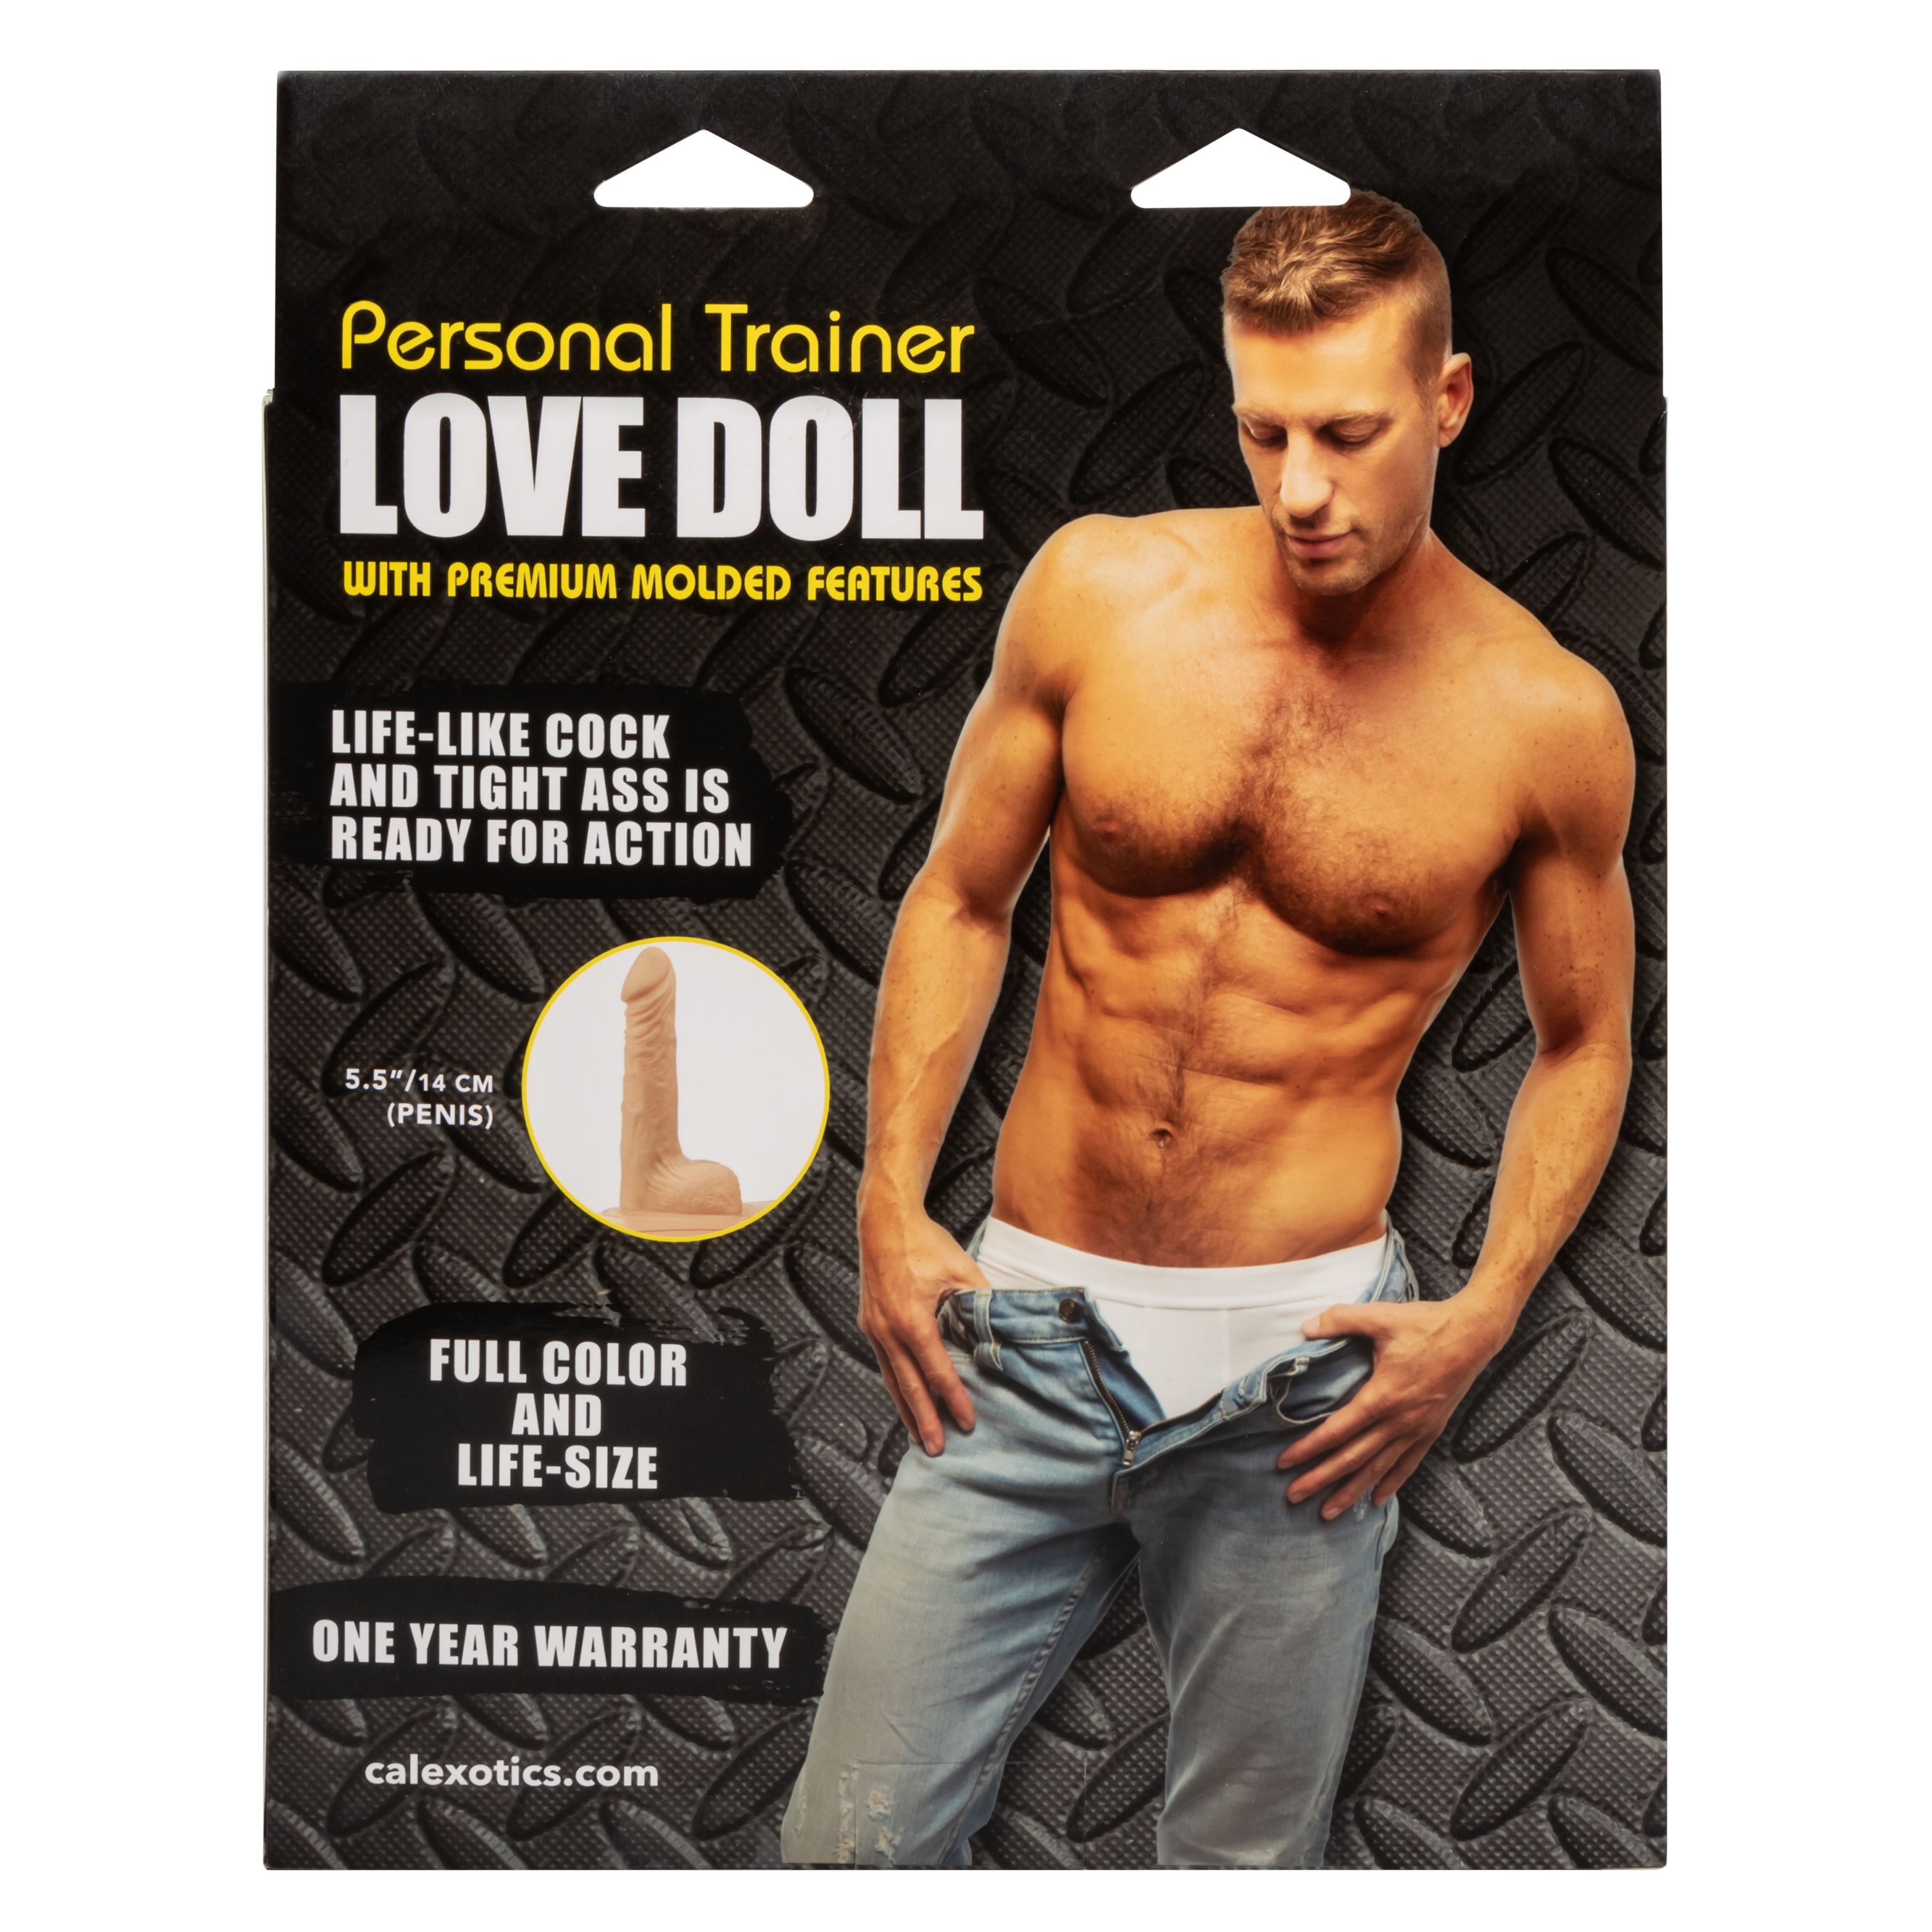 PERSONAL TRAINER LOVE DOLL - SE196405